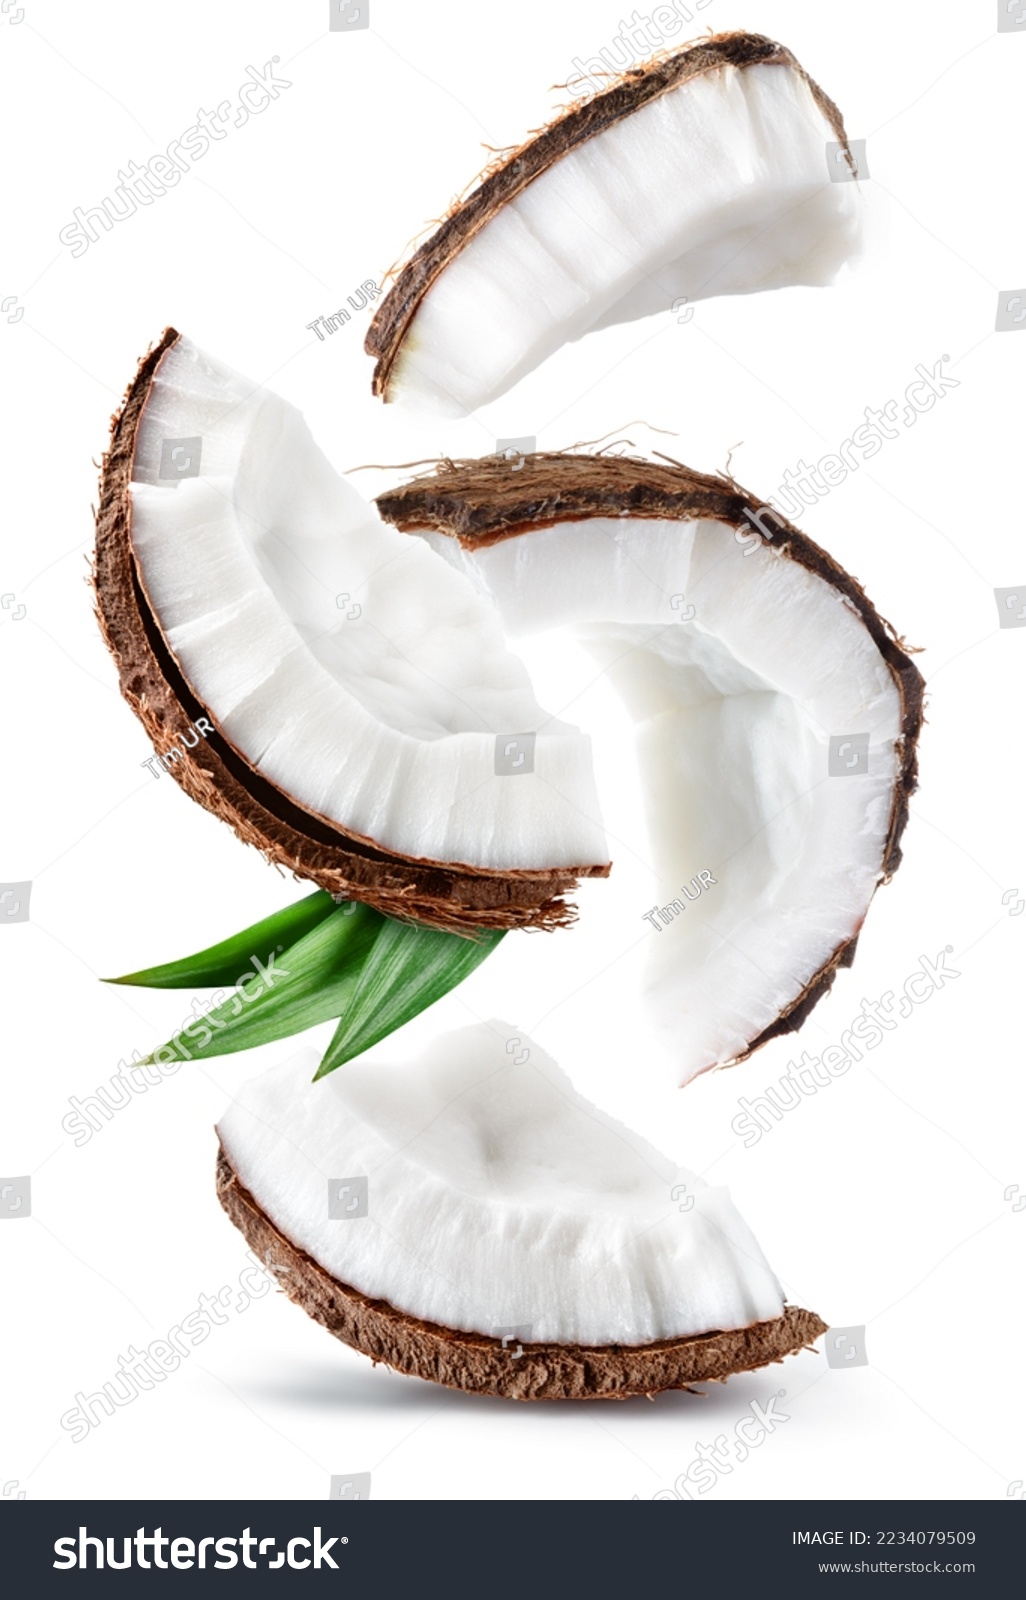 Coconut isolated. Coconut slice and piece with leaves on white background. Broken white coco flying. Composition. Full depth of field. #2234079509